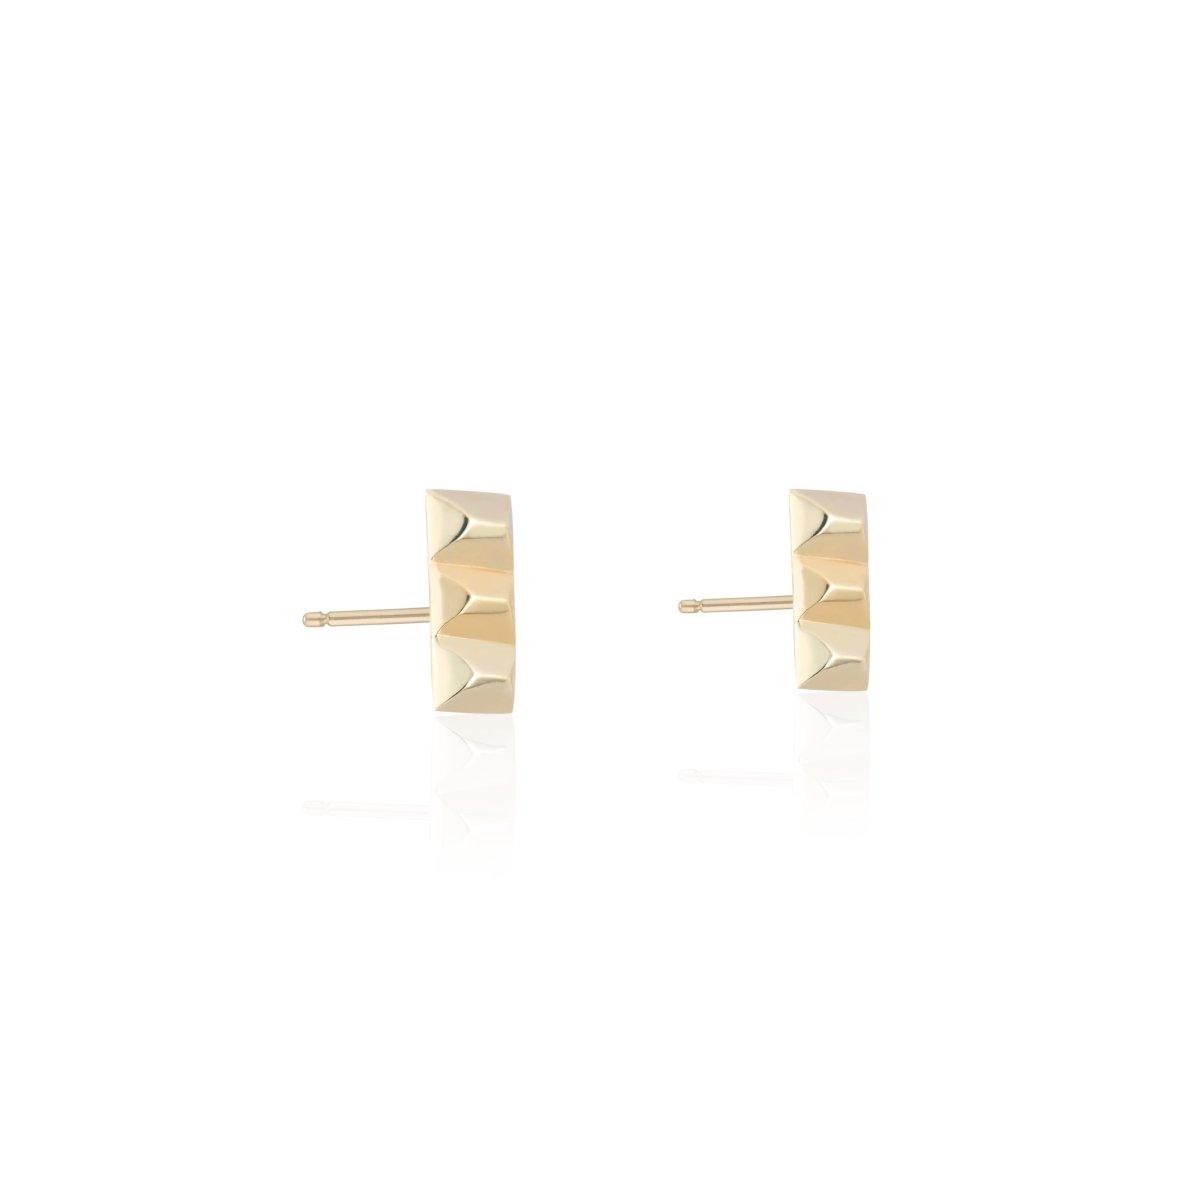 Gold Sparks Fly Bar Studs - Nataly Aponte